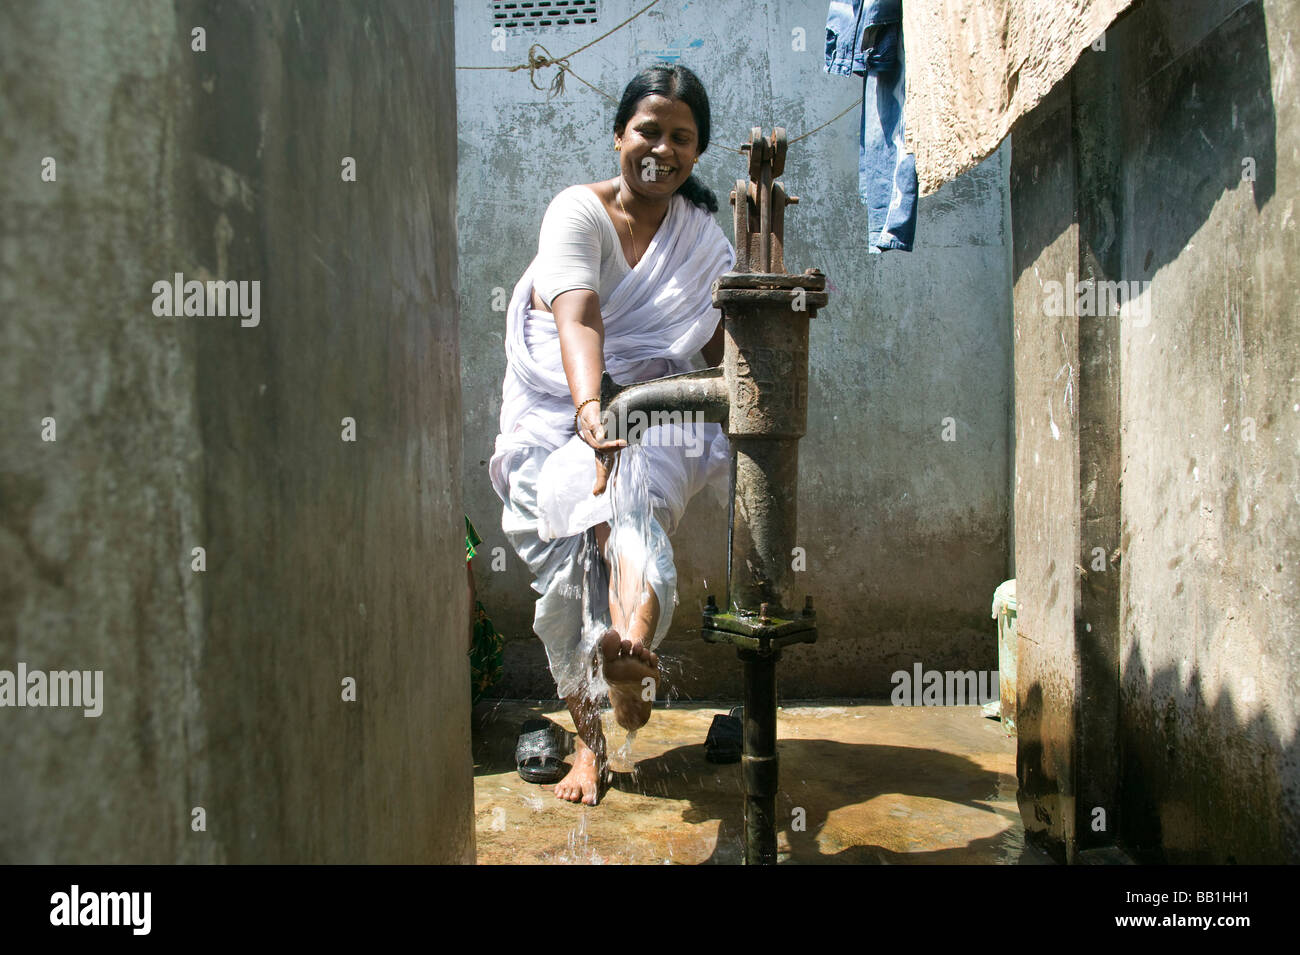 Leader for women's rights washing her feet in brothel, Tangail, Bangladesh. Stock Photo